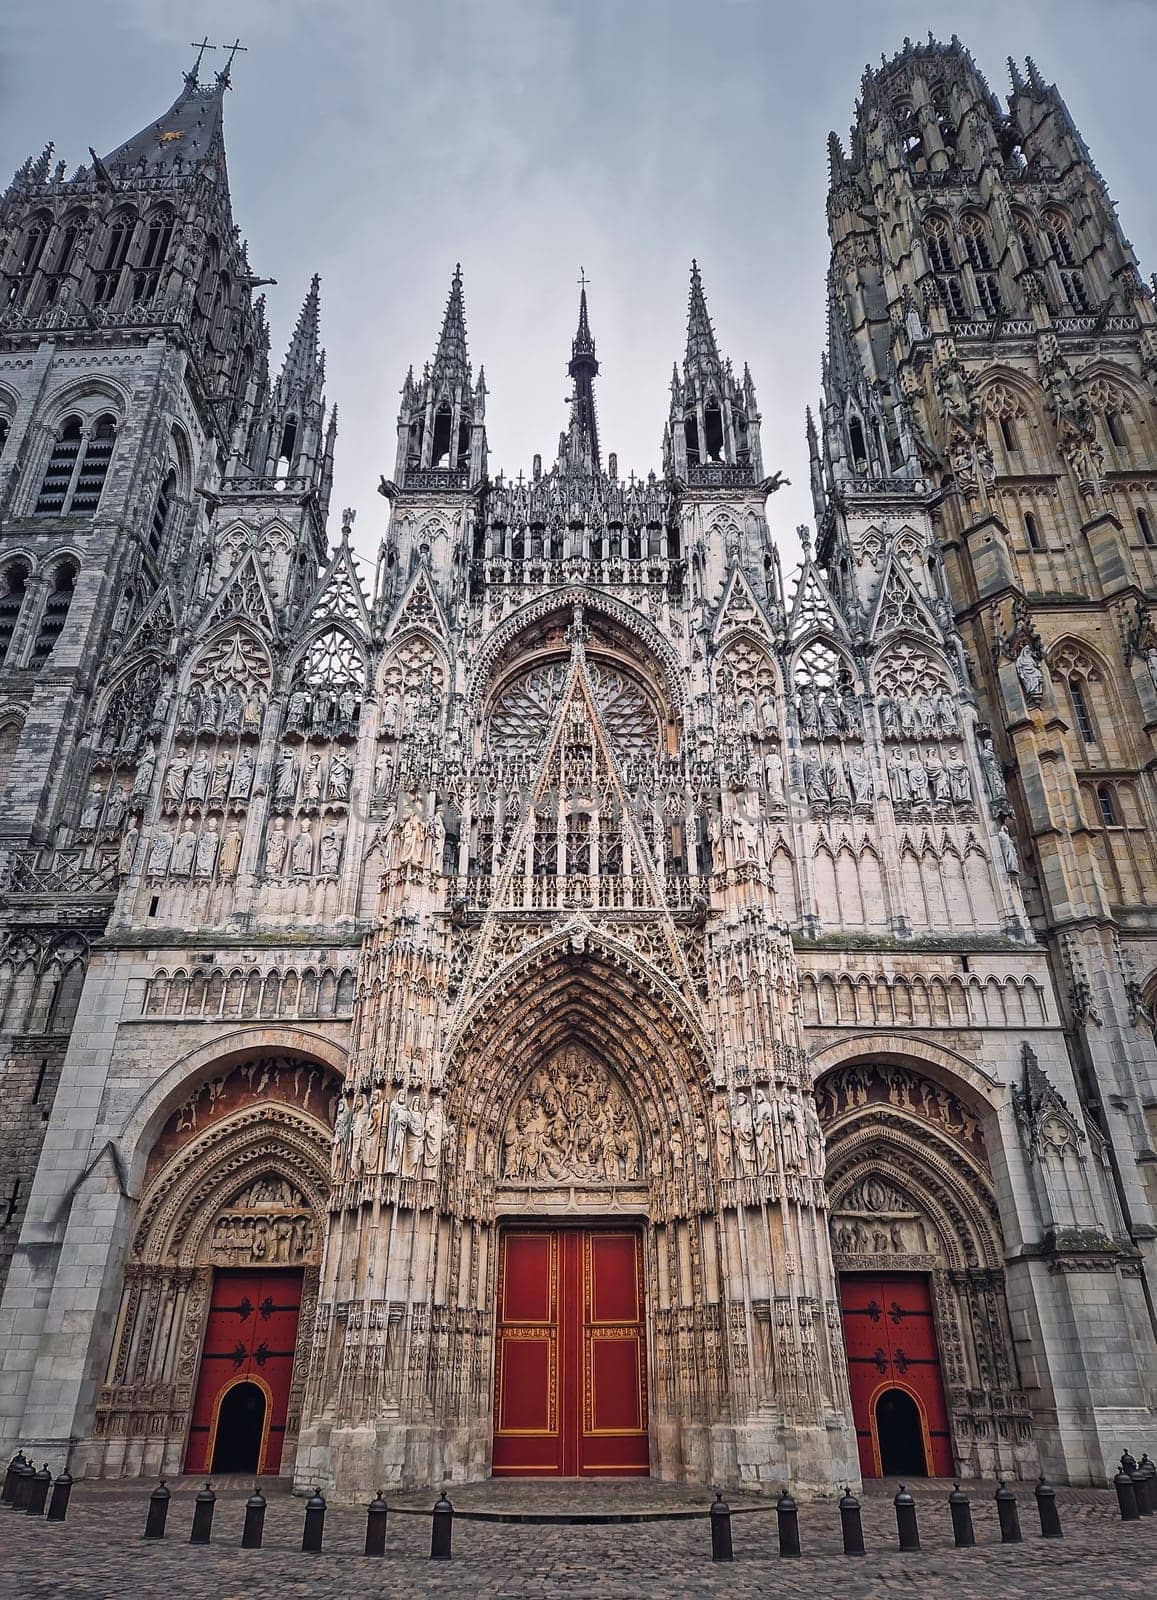 Outdoor facade view of Notre Dame de Rouen Cathedral in the Normandy, France. Architectural landmark featuring styles from Early Gothic to late Flamboyant and Renaissance architecture